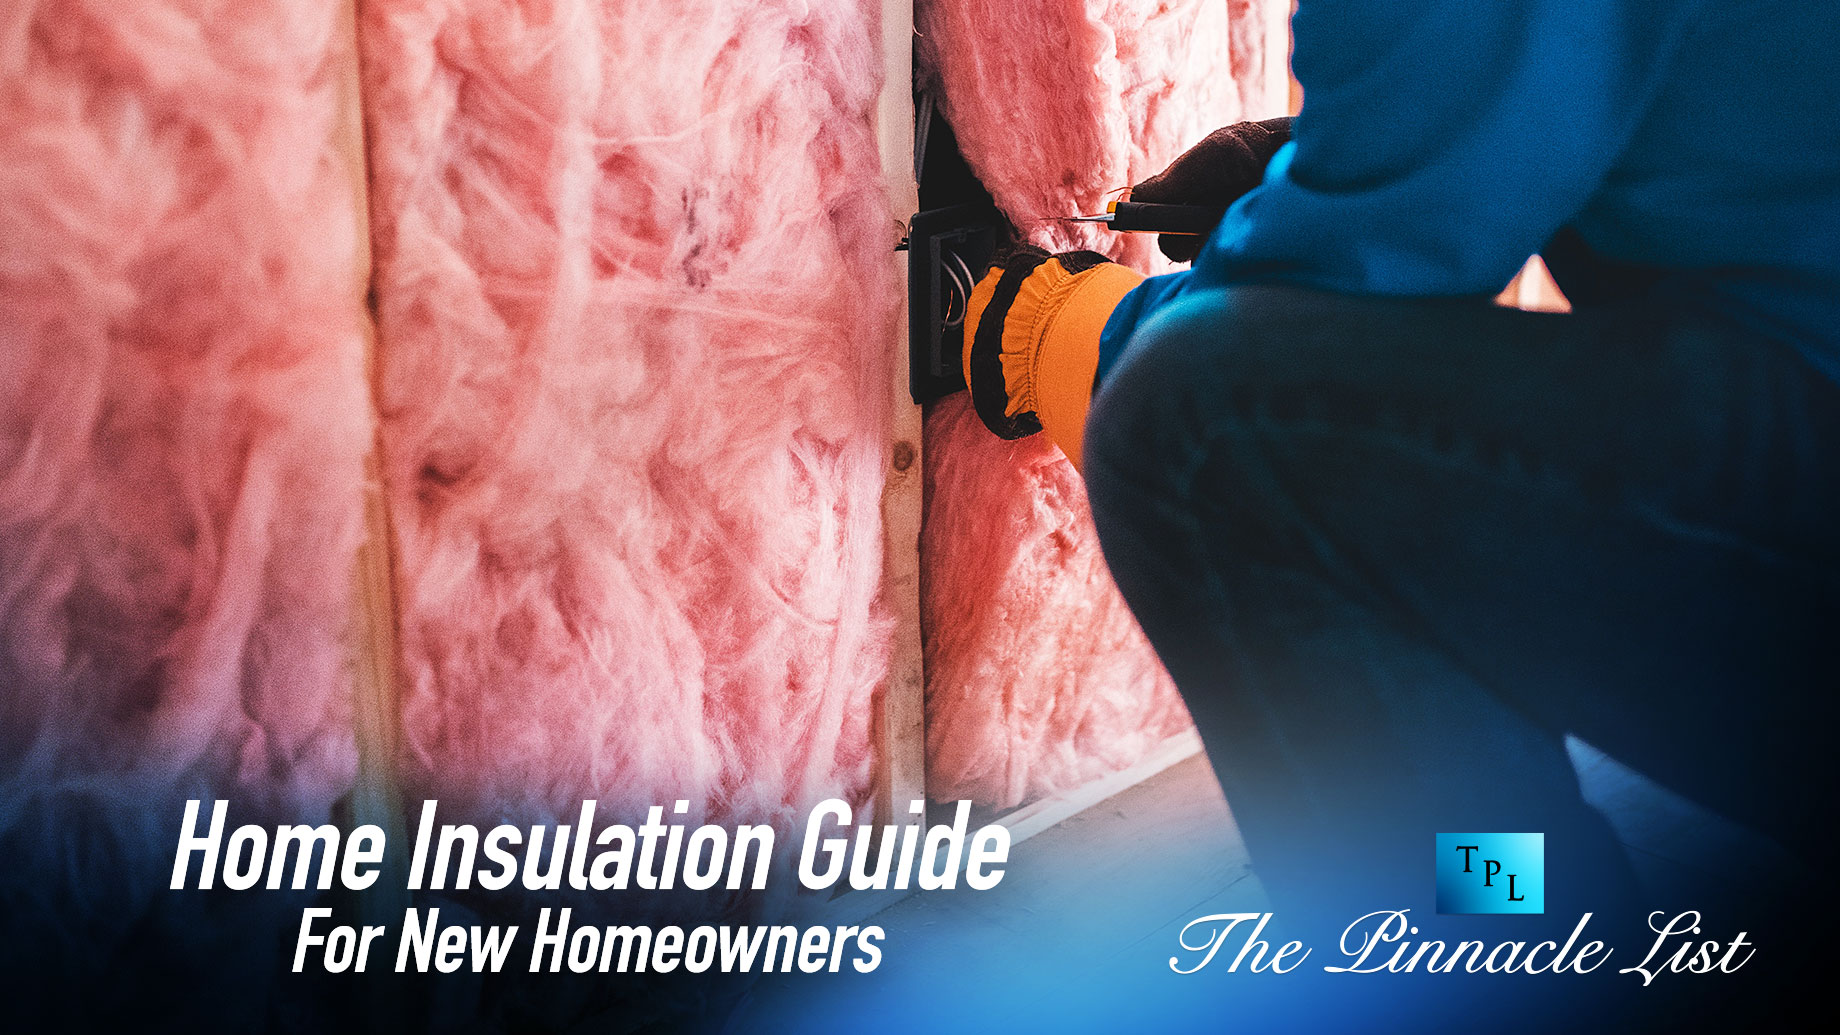 Home Insulation Guide For New Homeowners